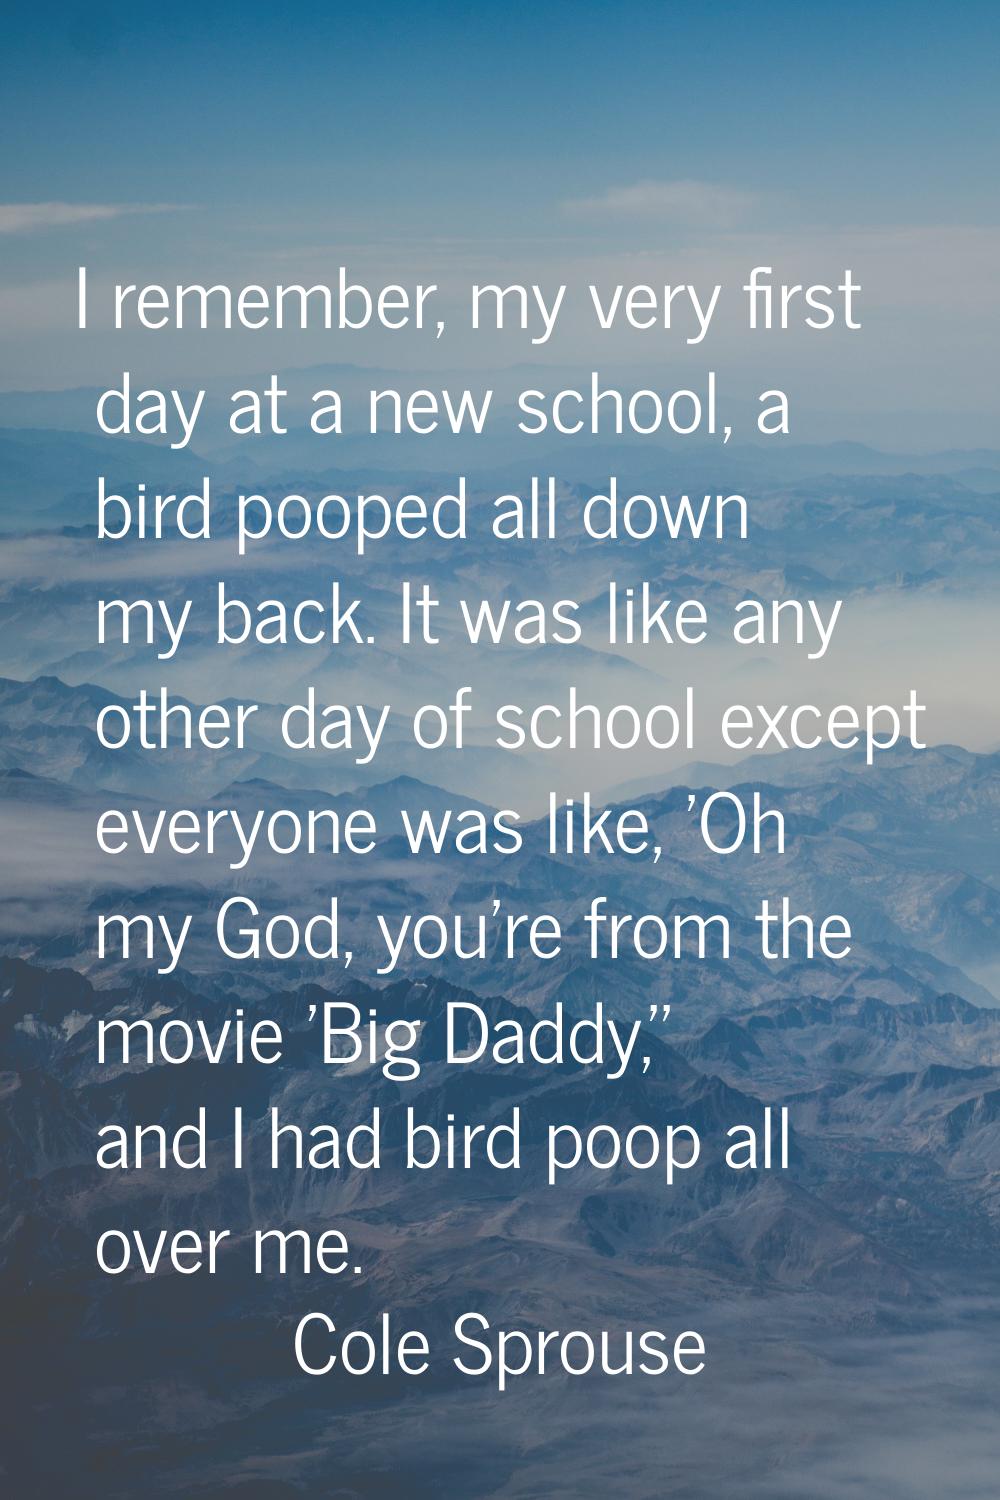 I remember, my very first day at a new school, a bird pooped all down my back. It was like any othe